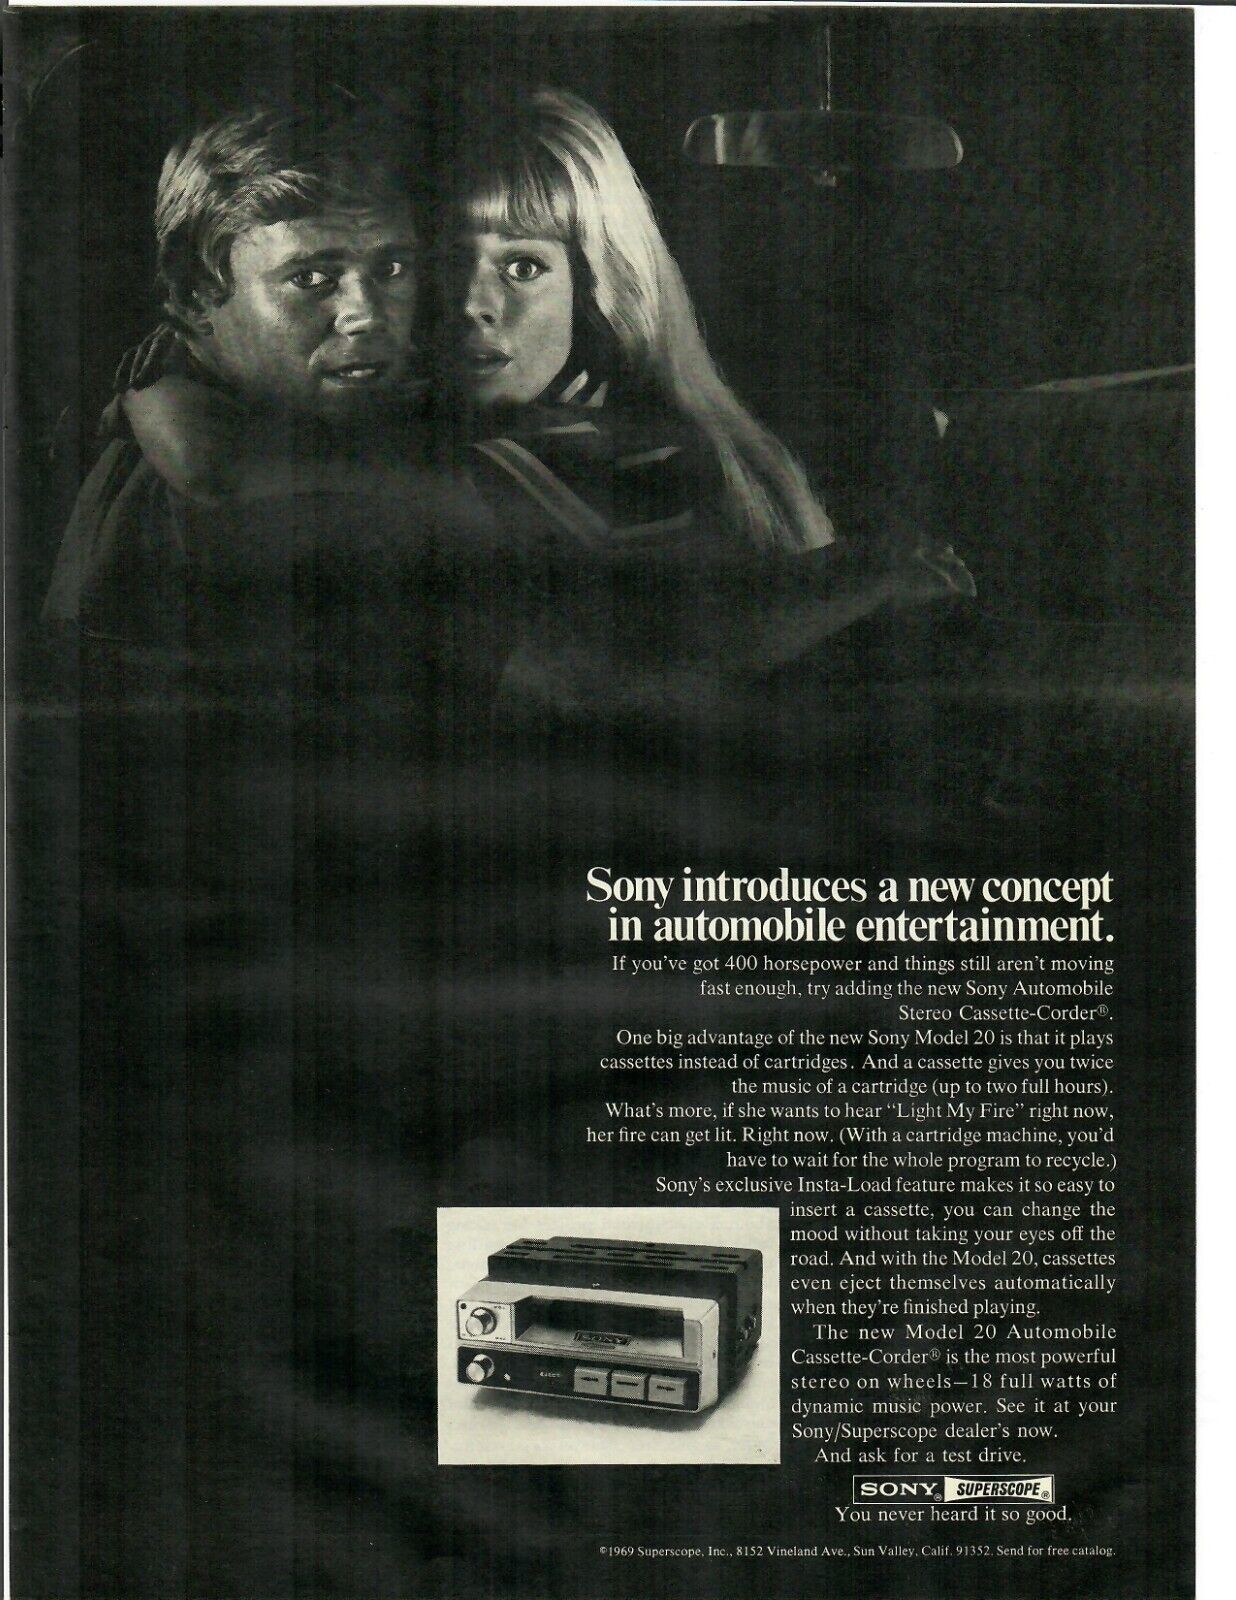 1969 Sony Car Stereo Vintage Print Ad A New Concept In Automobile Entertainment - $12.55